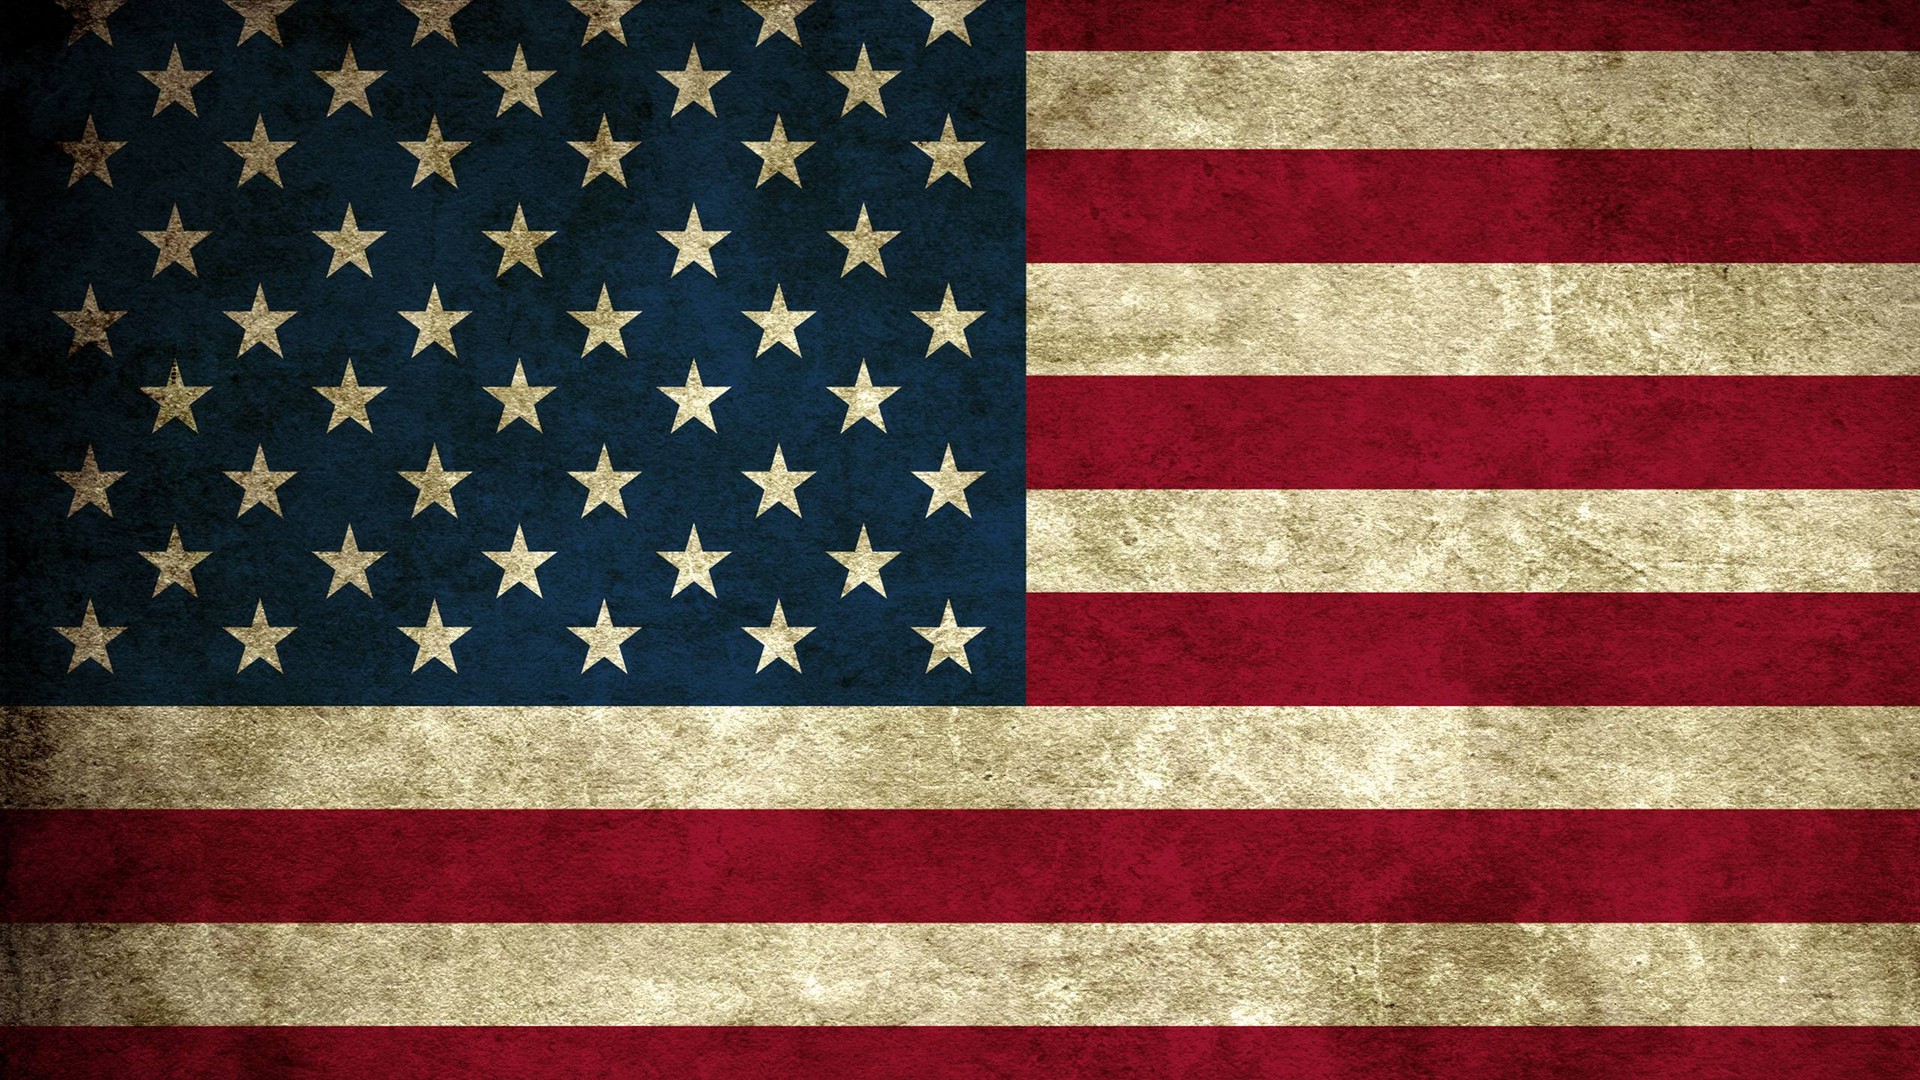 Wallpapers Computer American Flag With high-resolution 1920X1080 pixel. You can use this wallpaper for your Desktop Computer Backgrounds, Mac Wallpapers, Android Lock screen or iPhone Screensavers and another smartphone device